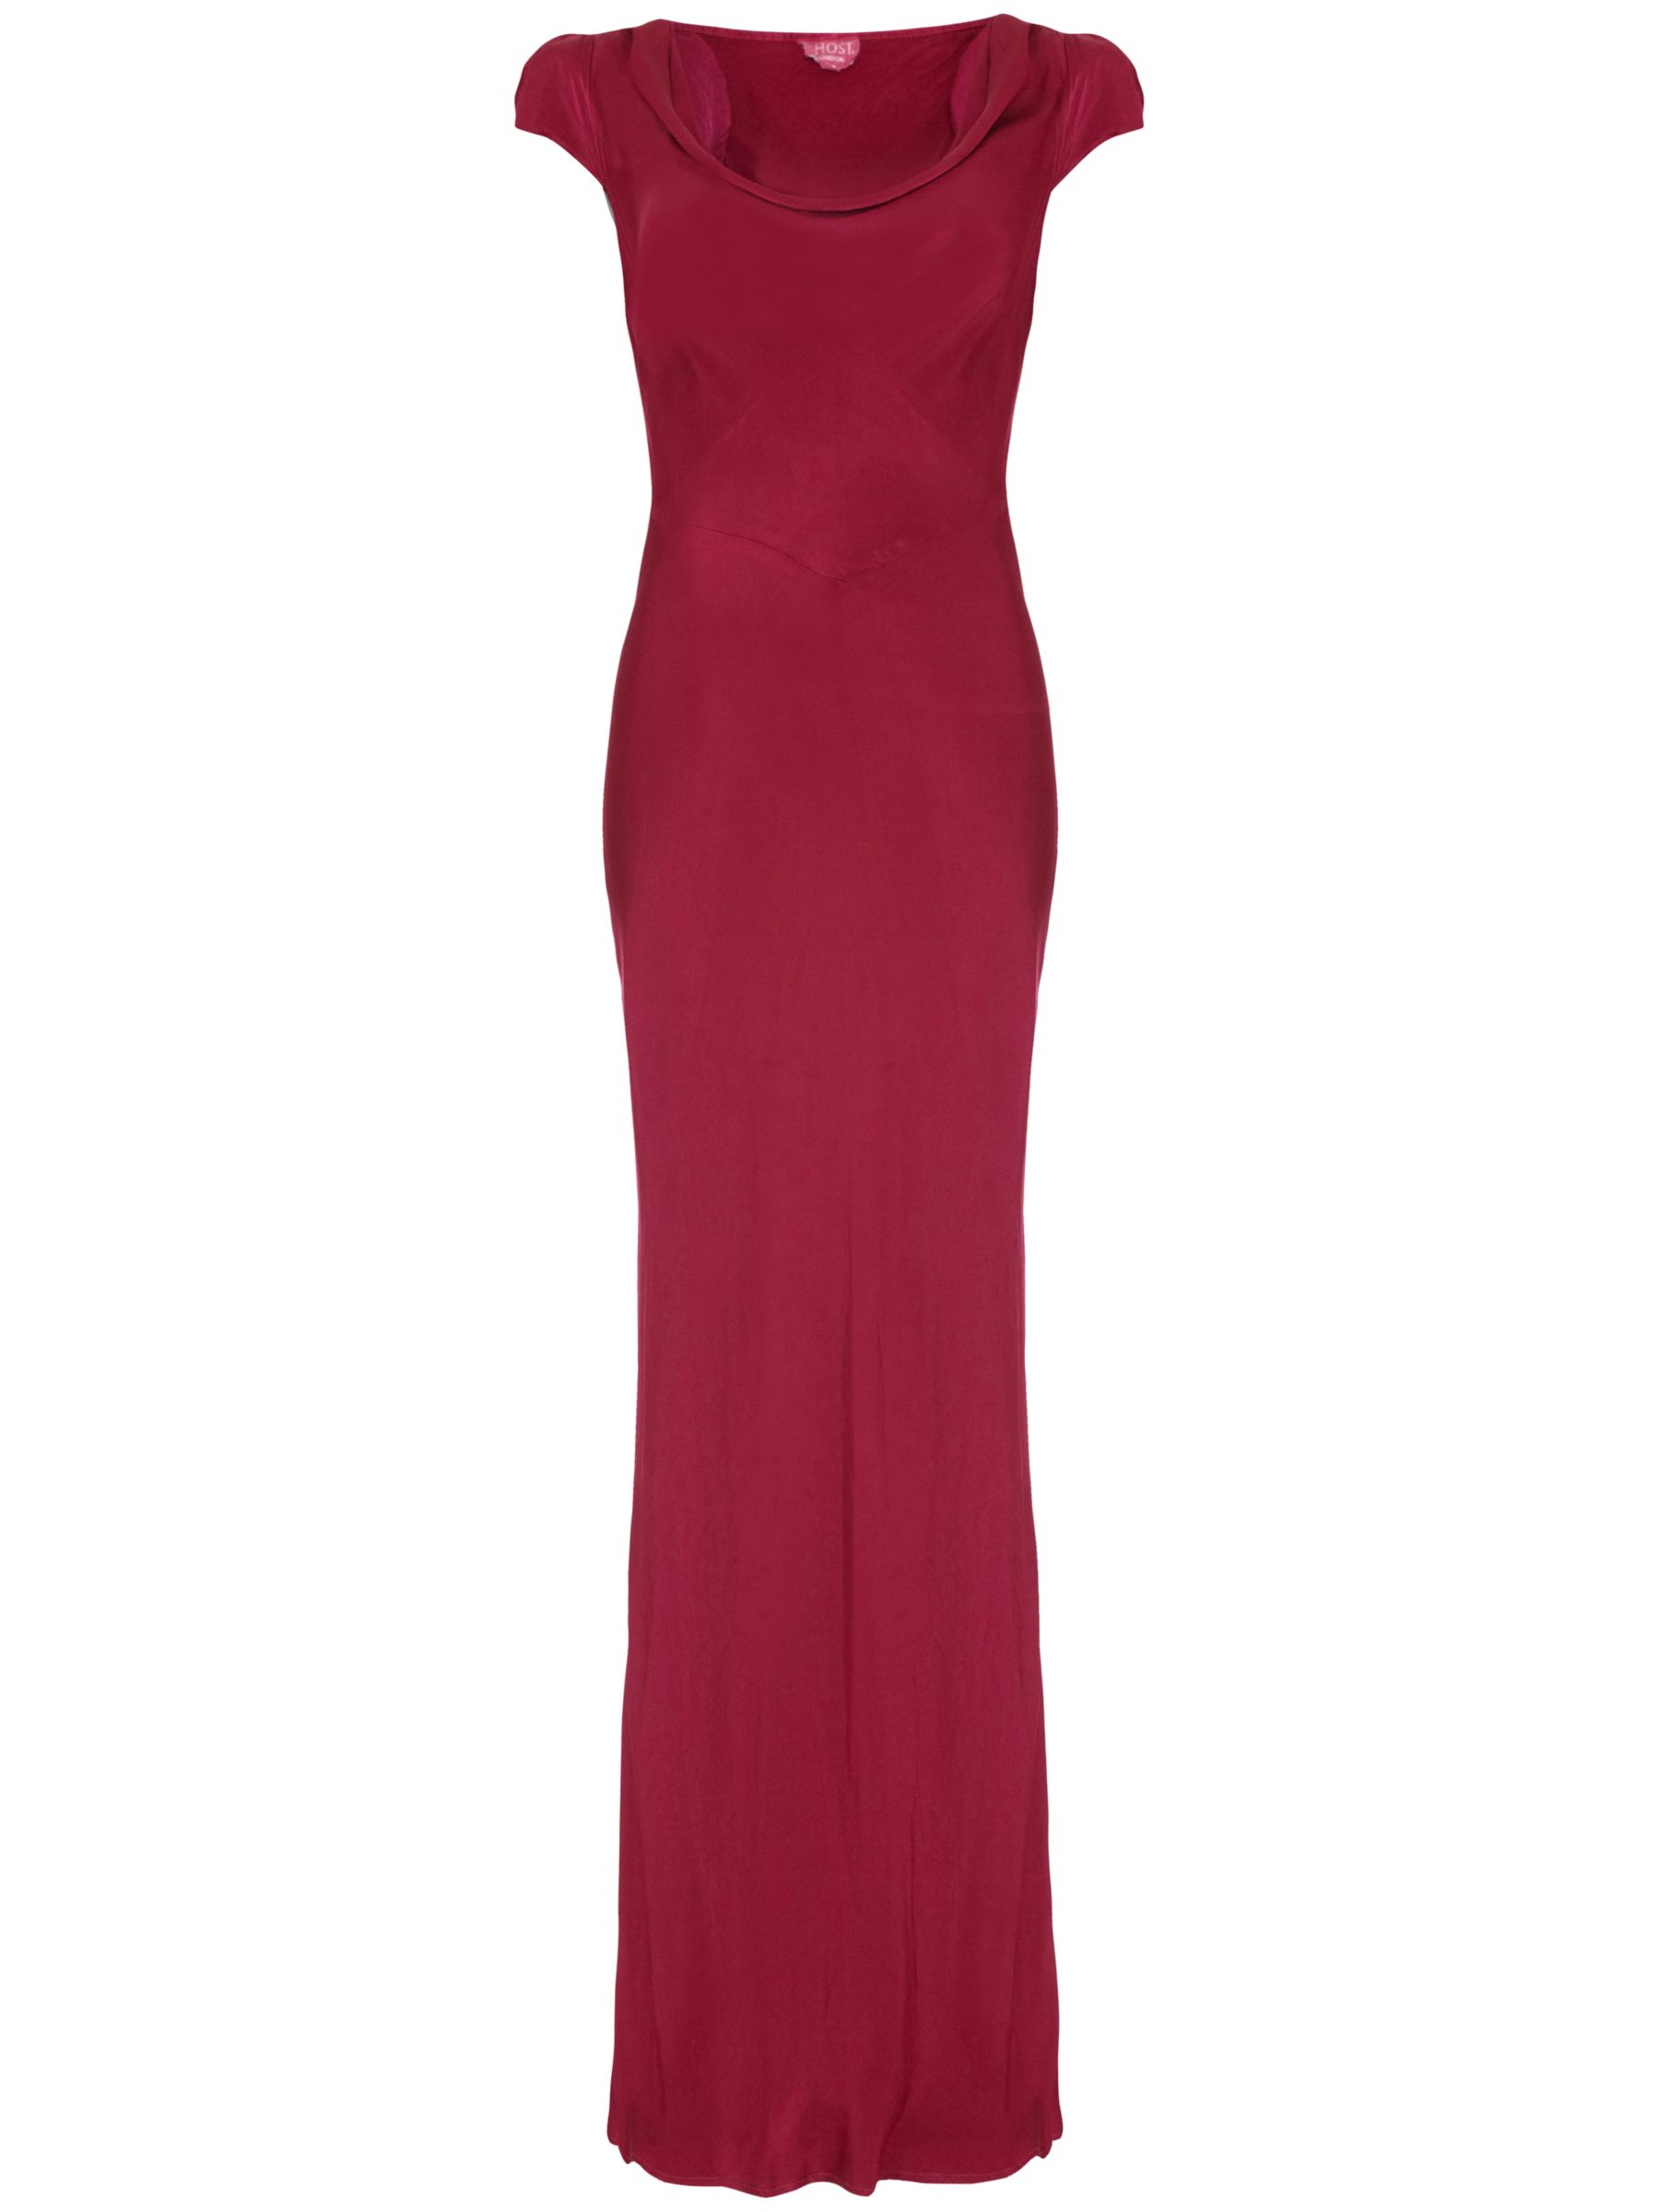 Ghost Sylvia Dress, Beet Red